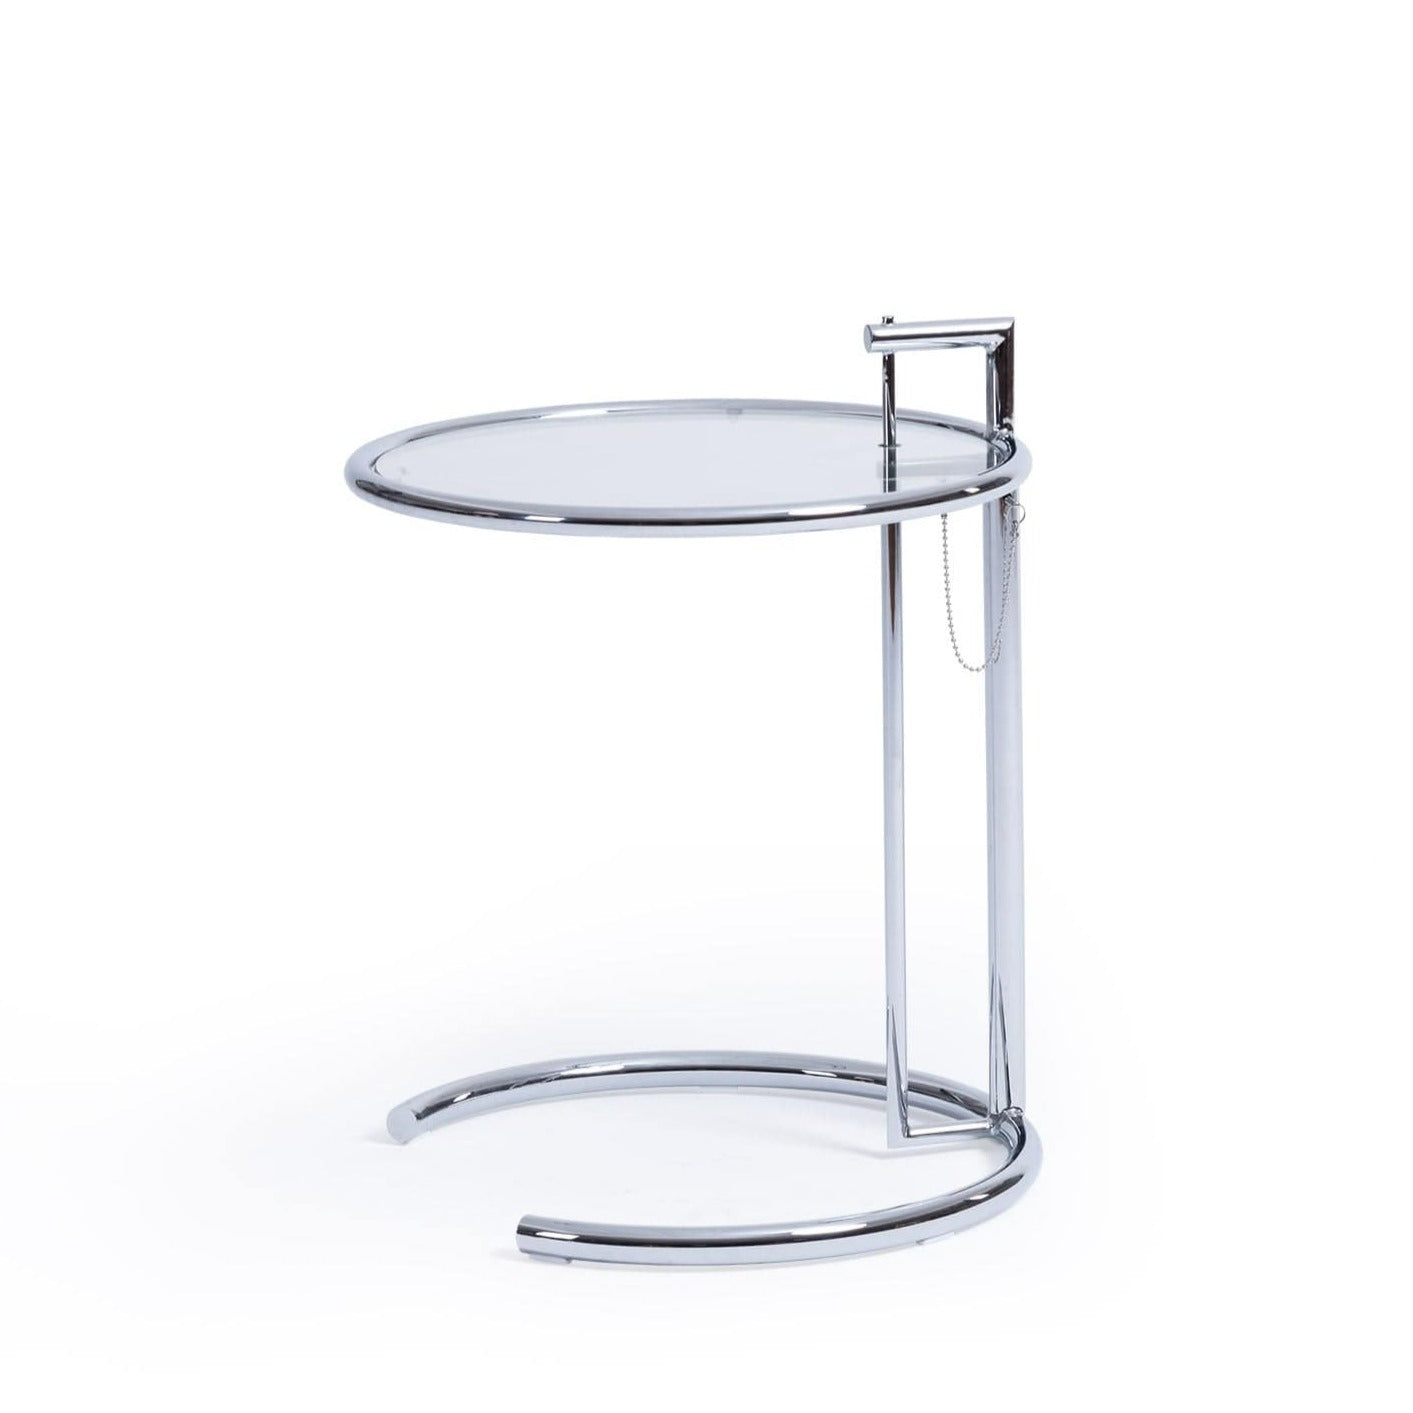 Custom Stainless Steel Side Table with Tempered Glass Top - CT1001 picket and rail